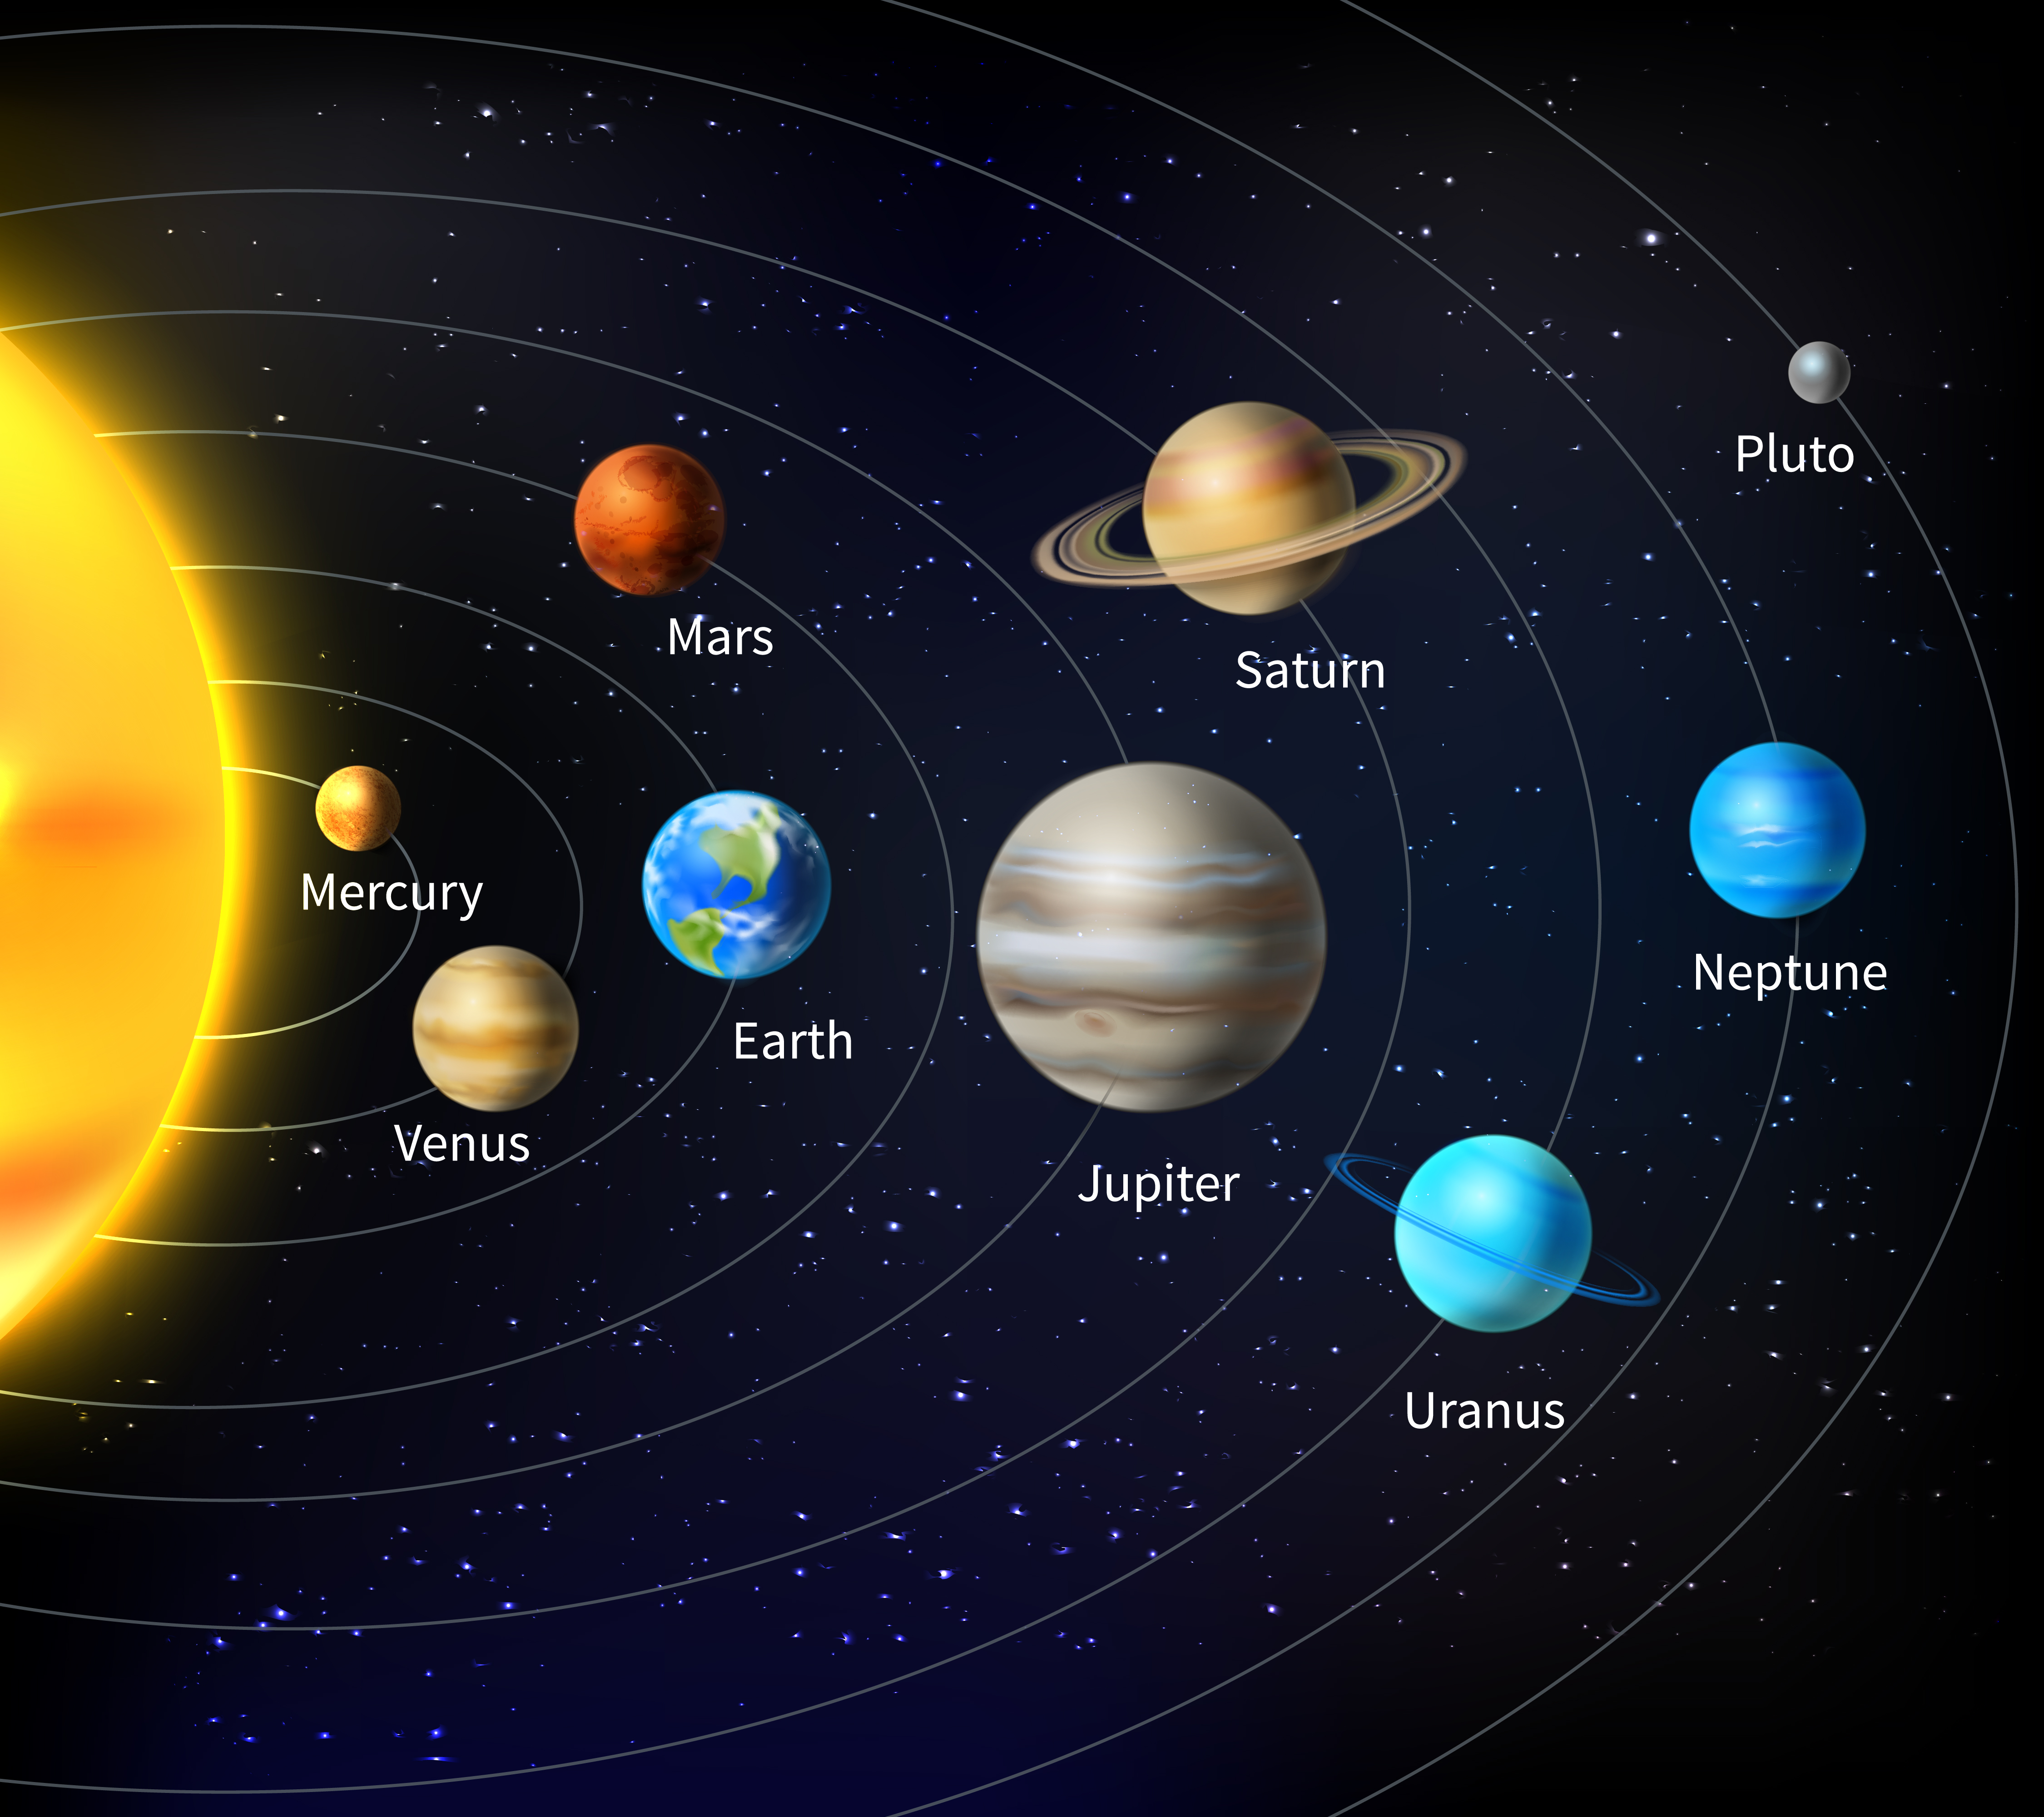 Solar System Background 428465 Download Free Vectors, Clipart